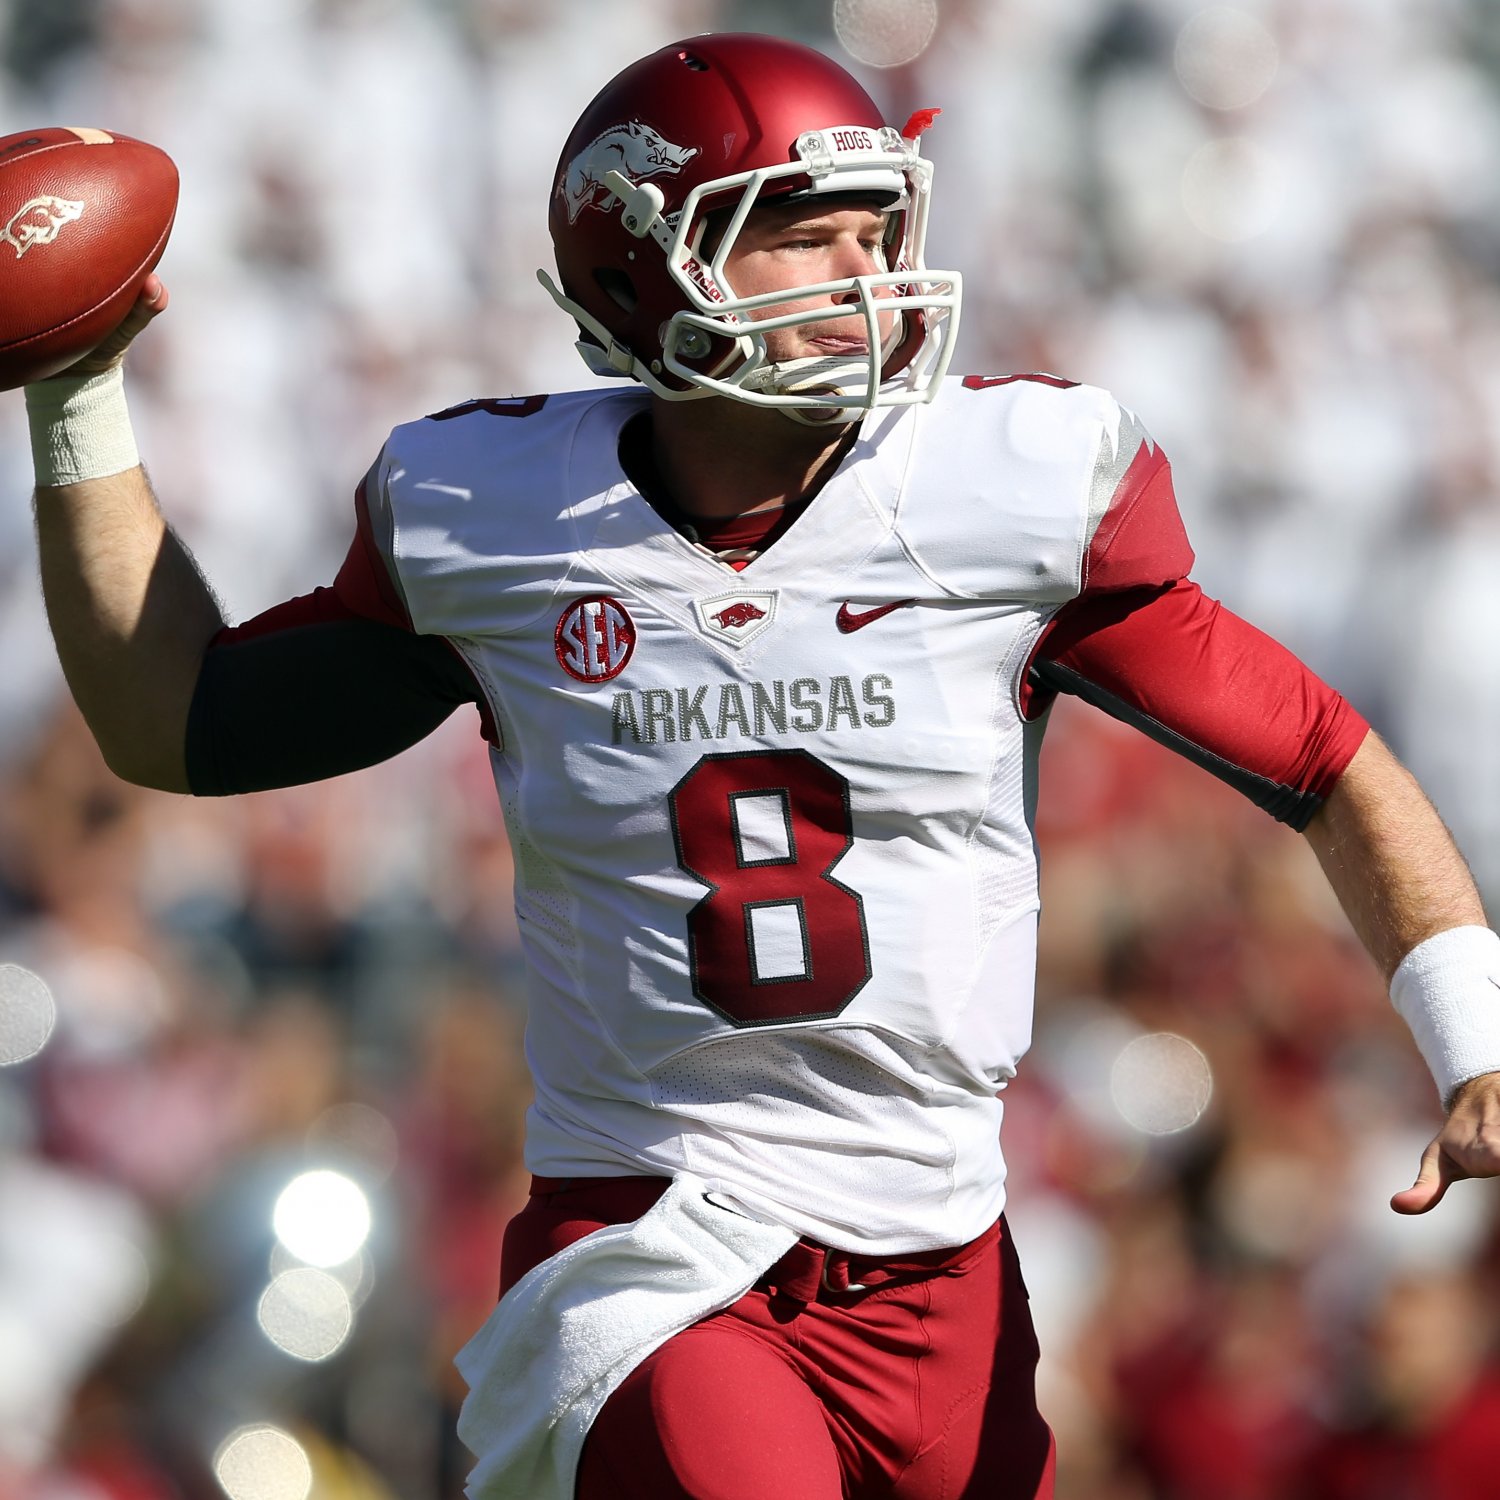 Ranking the Top 10 Quarterbacks in the 2013 NFL Draft and Where They